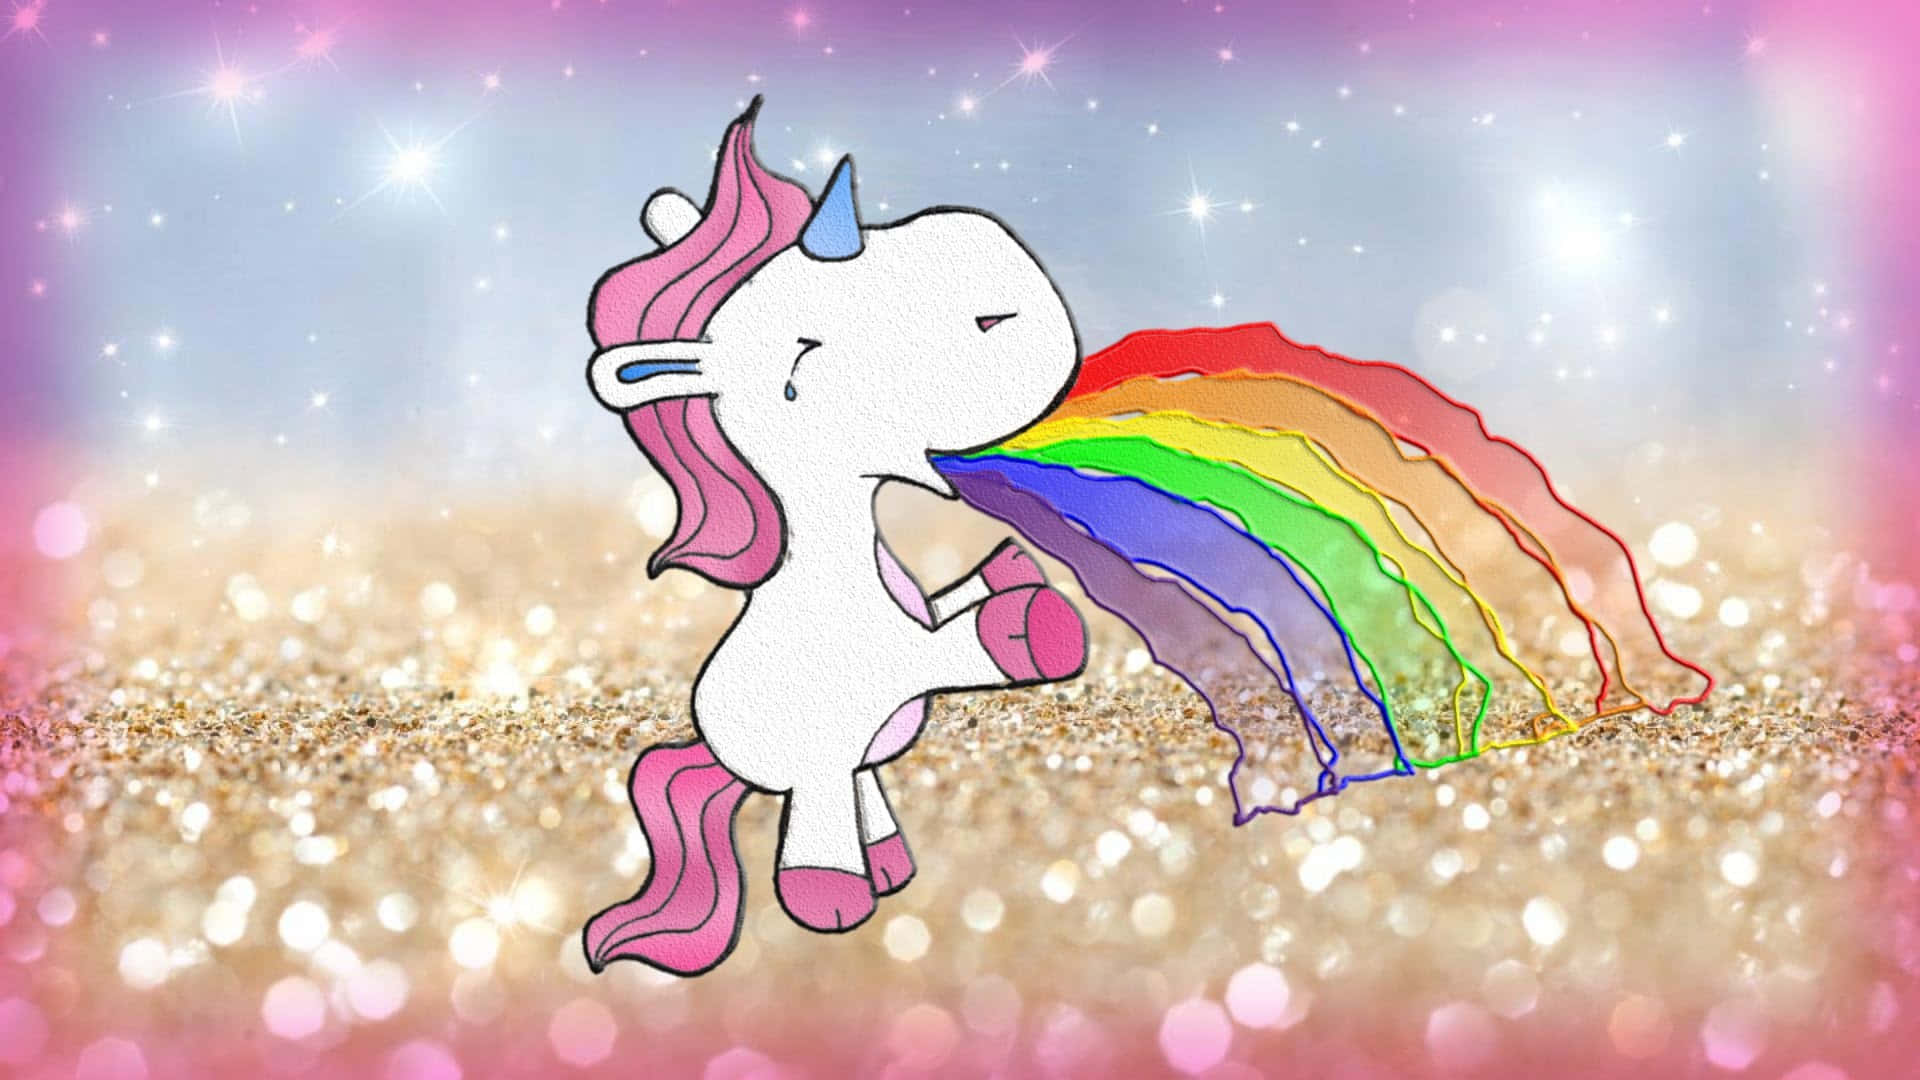 The magical colors of the Rainbow Unicorn